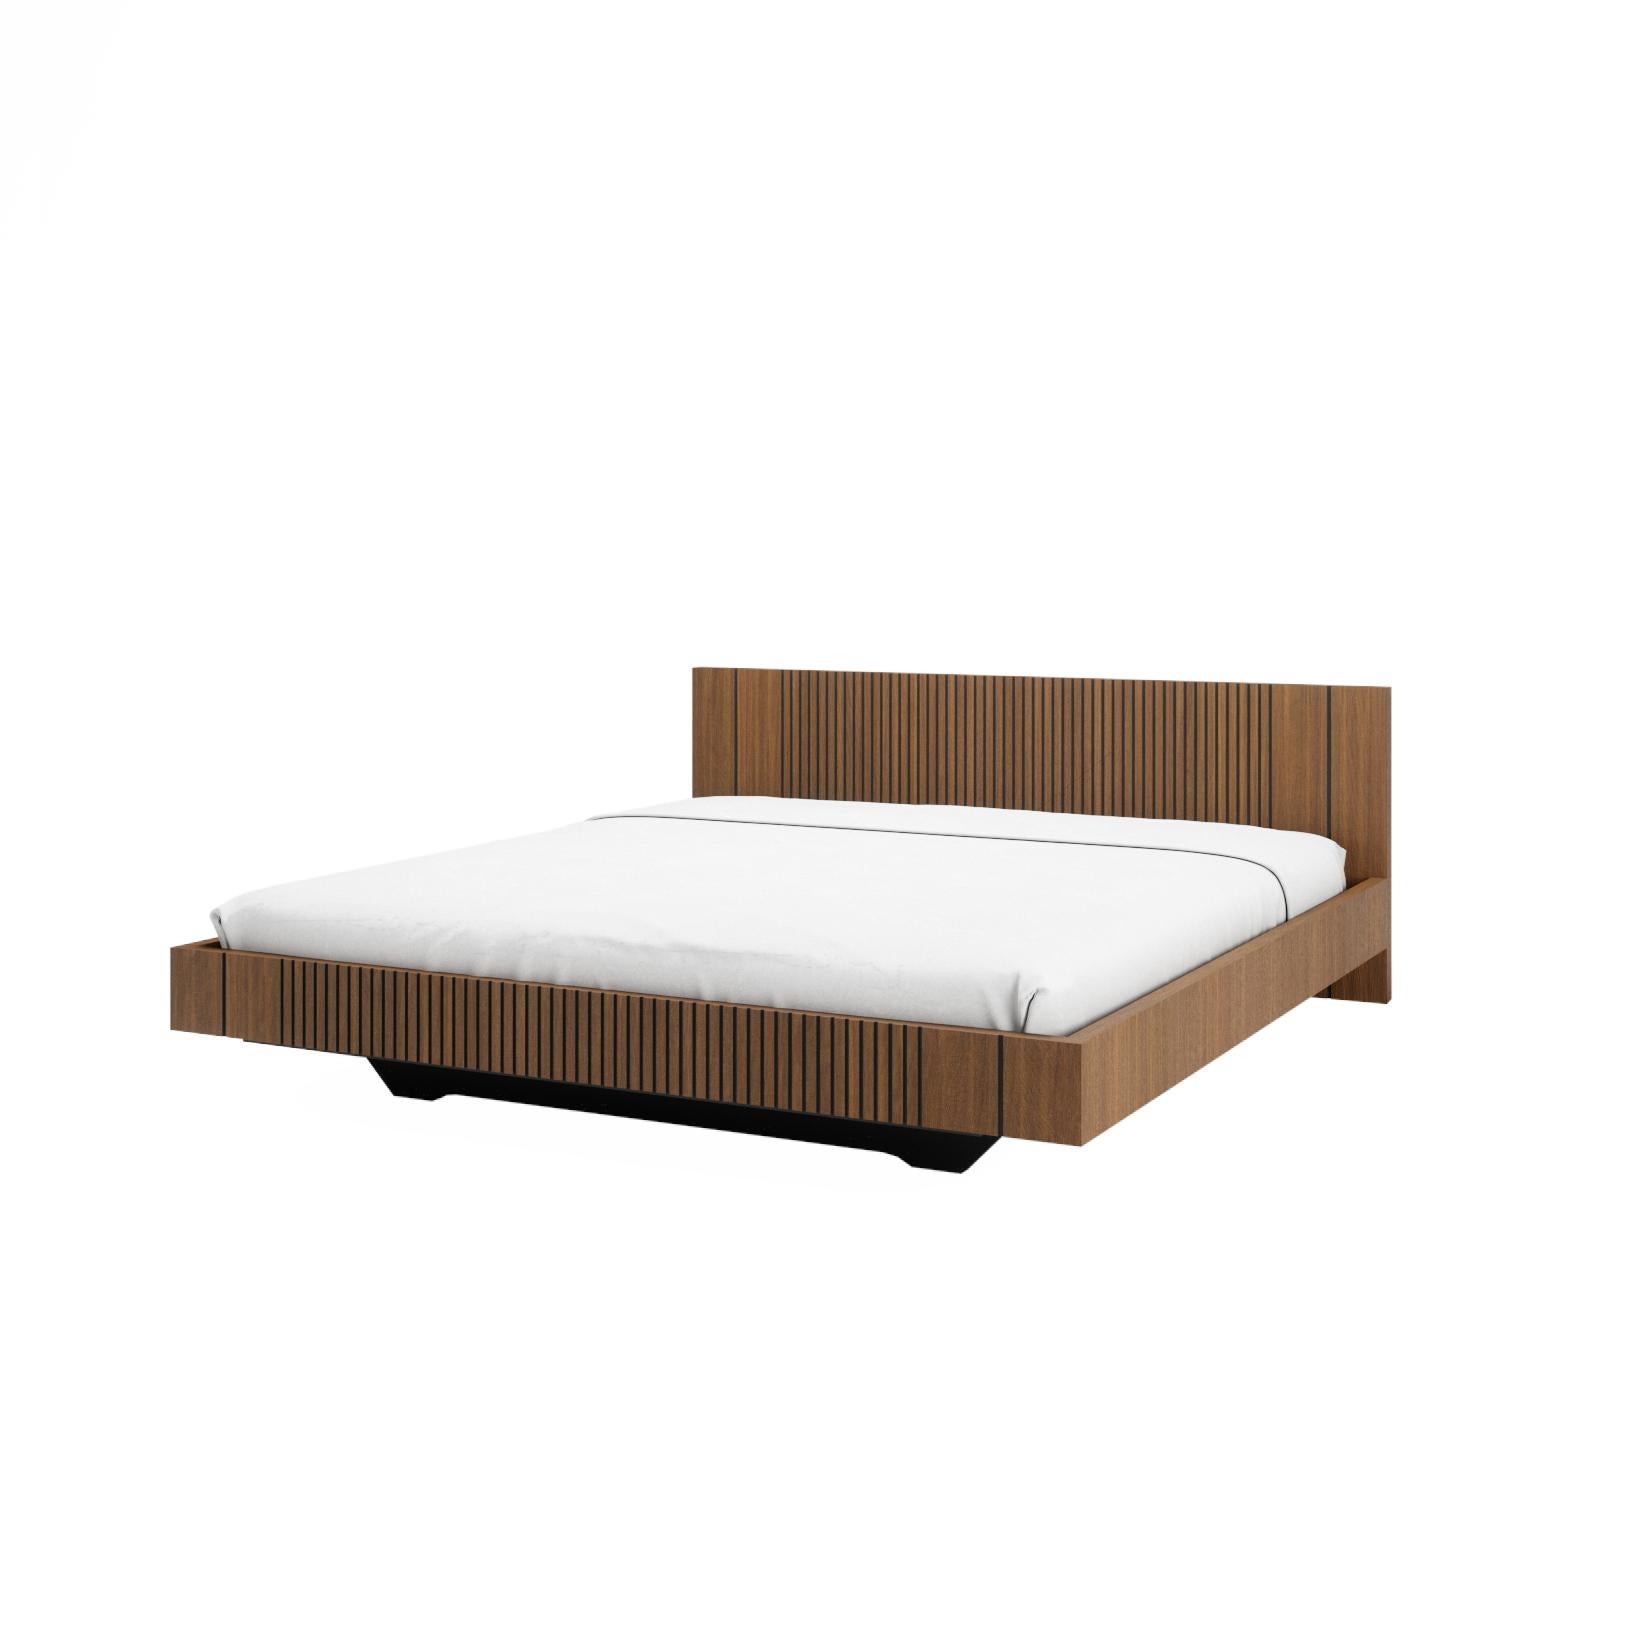 Portuguese Piana Simple Bed For Sale